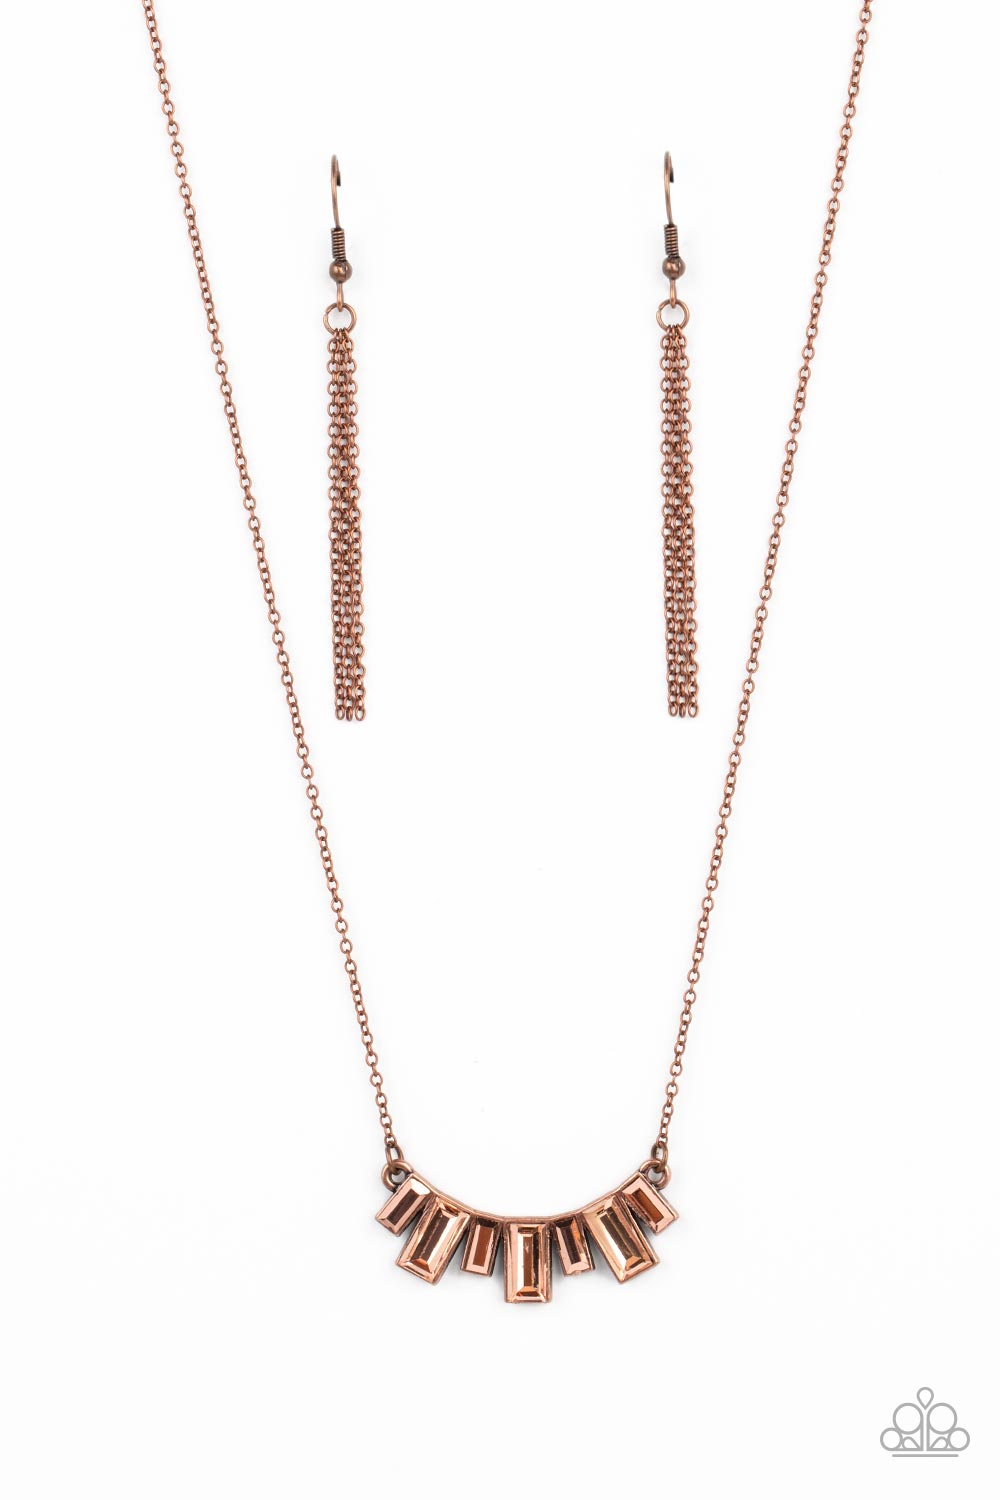 Paparazzi Jewelry Covert Operation - Men’s Copper Necklace Bling by Jessiek